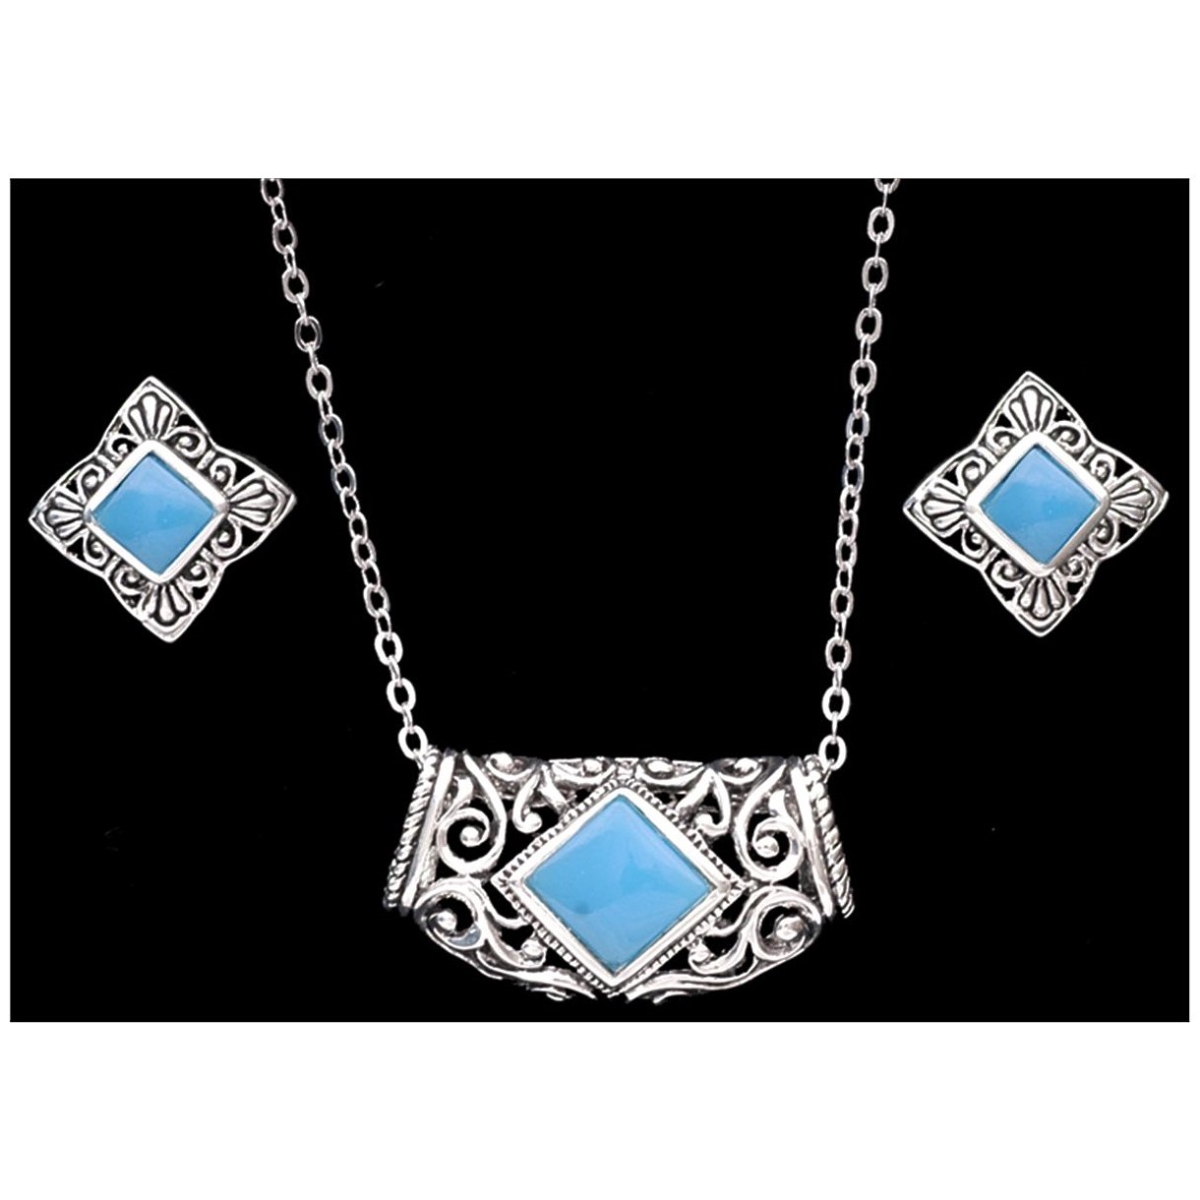 Den1000 Silver With Turquoise Stones Filigree Scroll Necklace